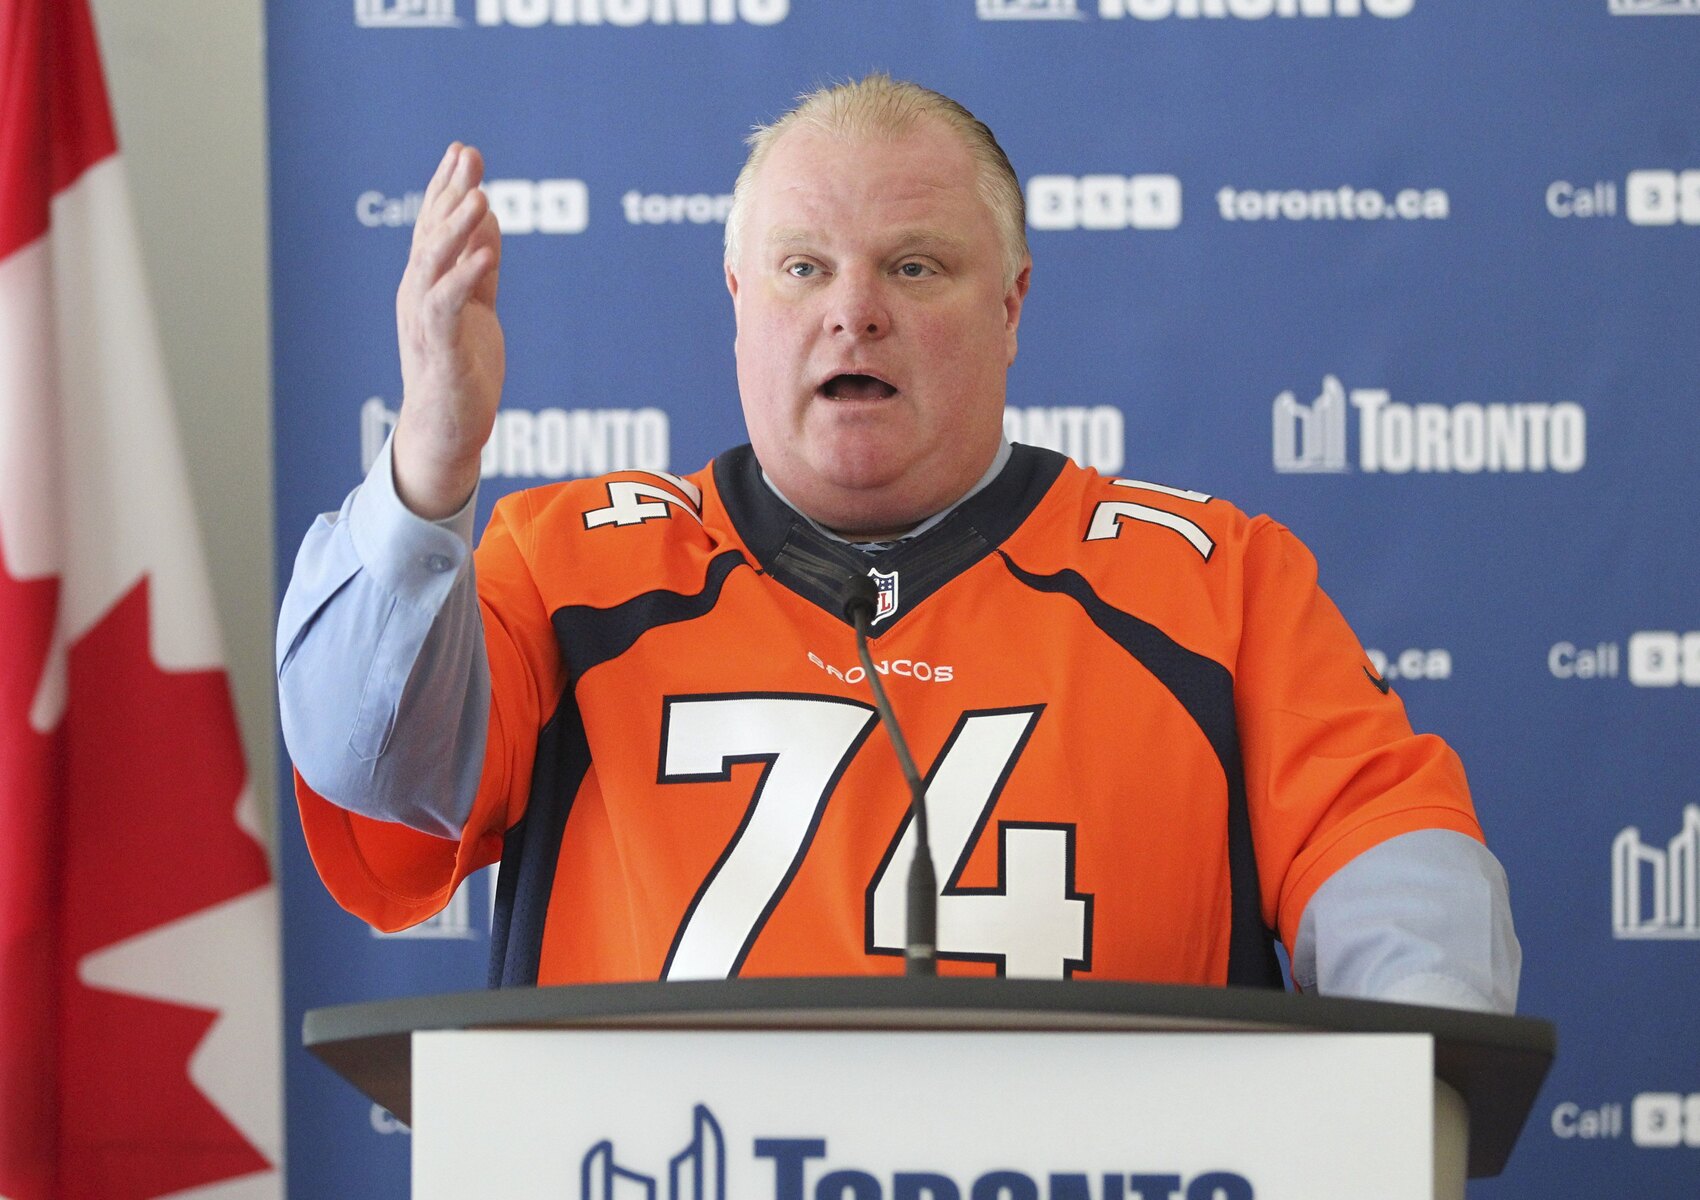 20-mind-blowing-facts-about-rob-ford